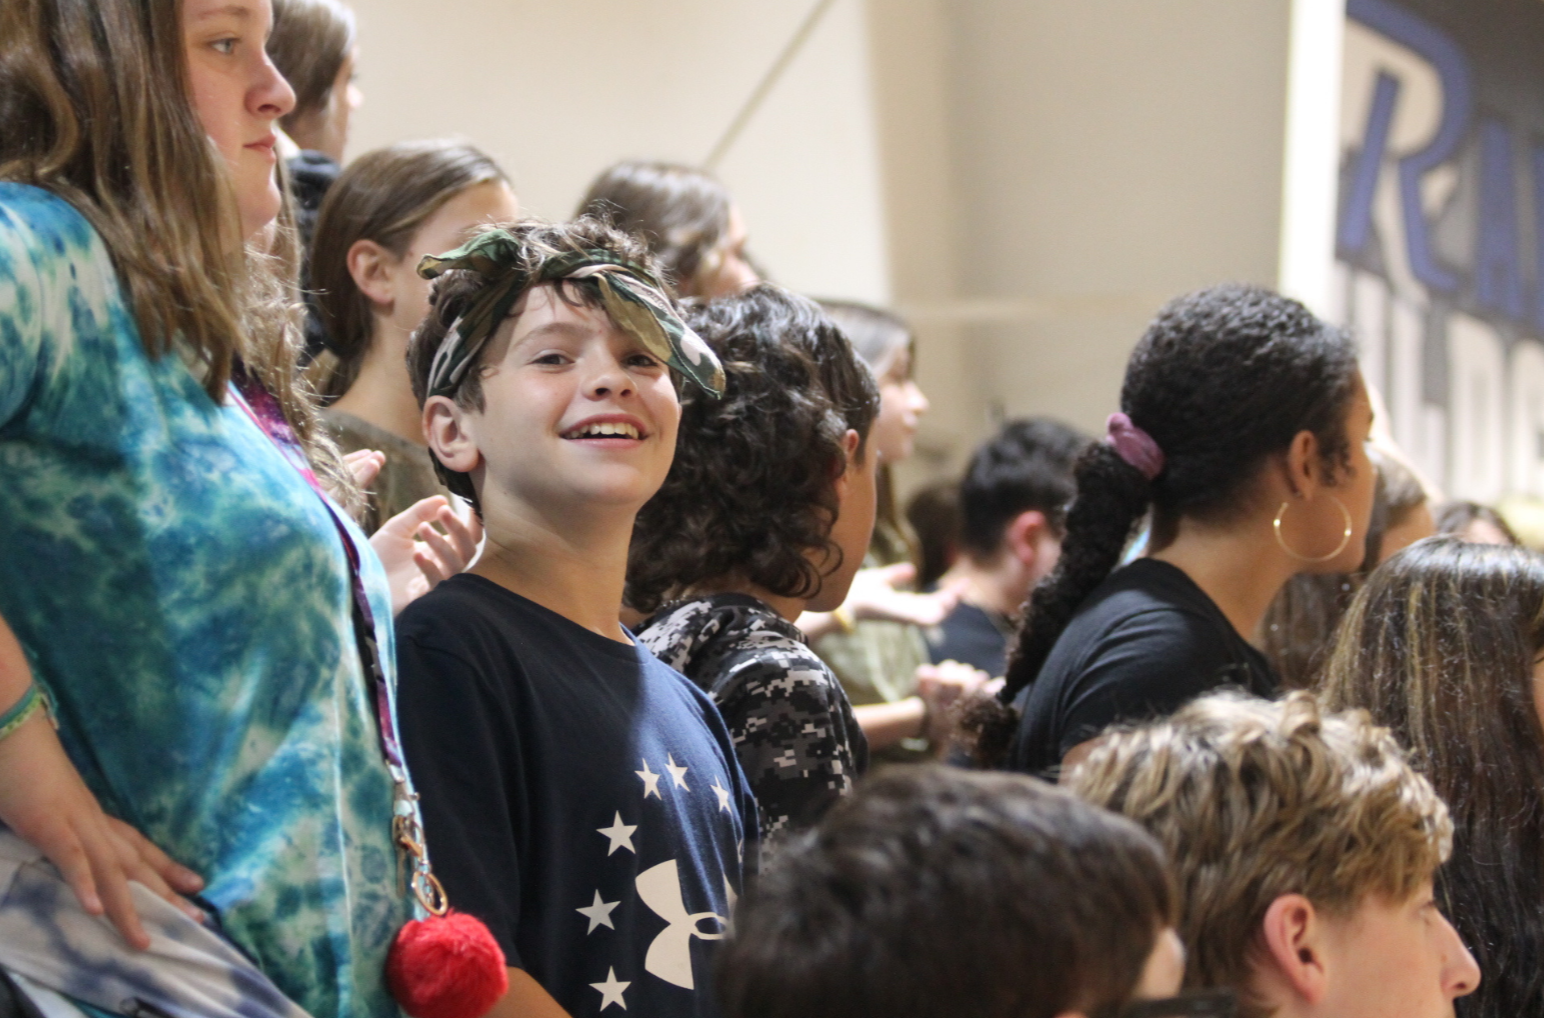 Student smiles in a crowd at a pep rally